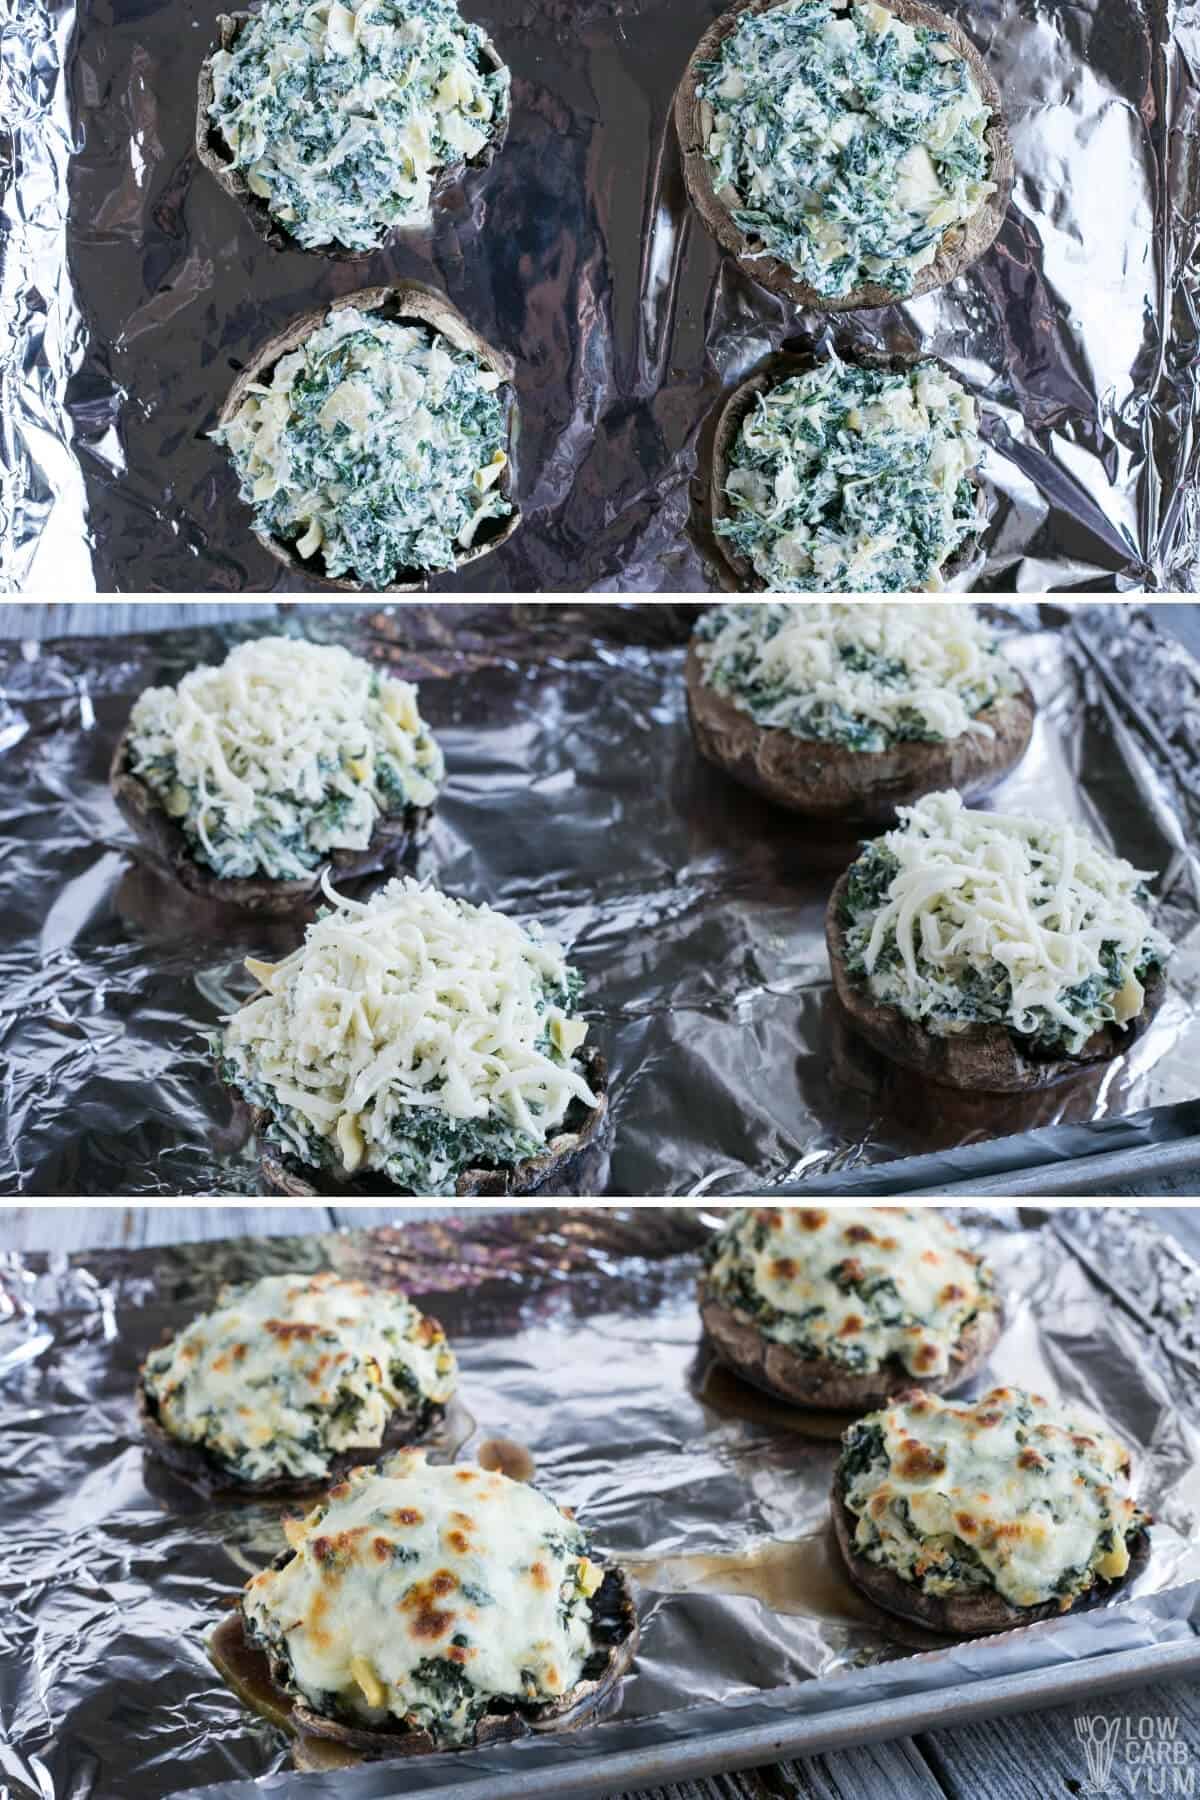 assembling and baking stuffed portobello mushrooms with spinach filling